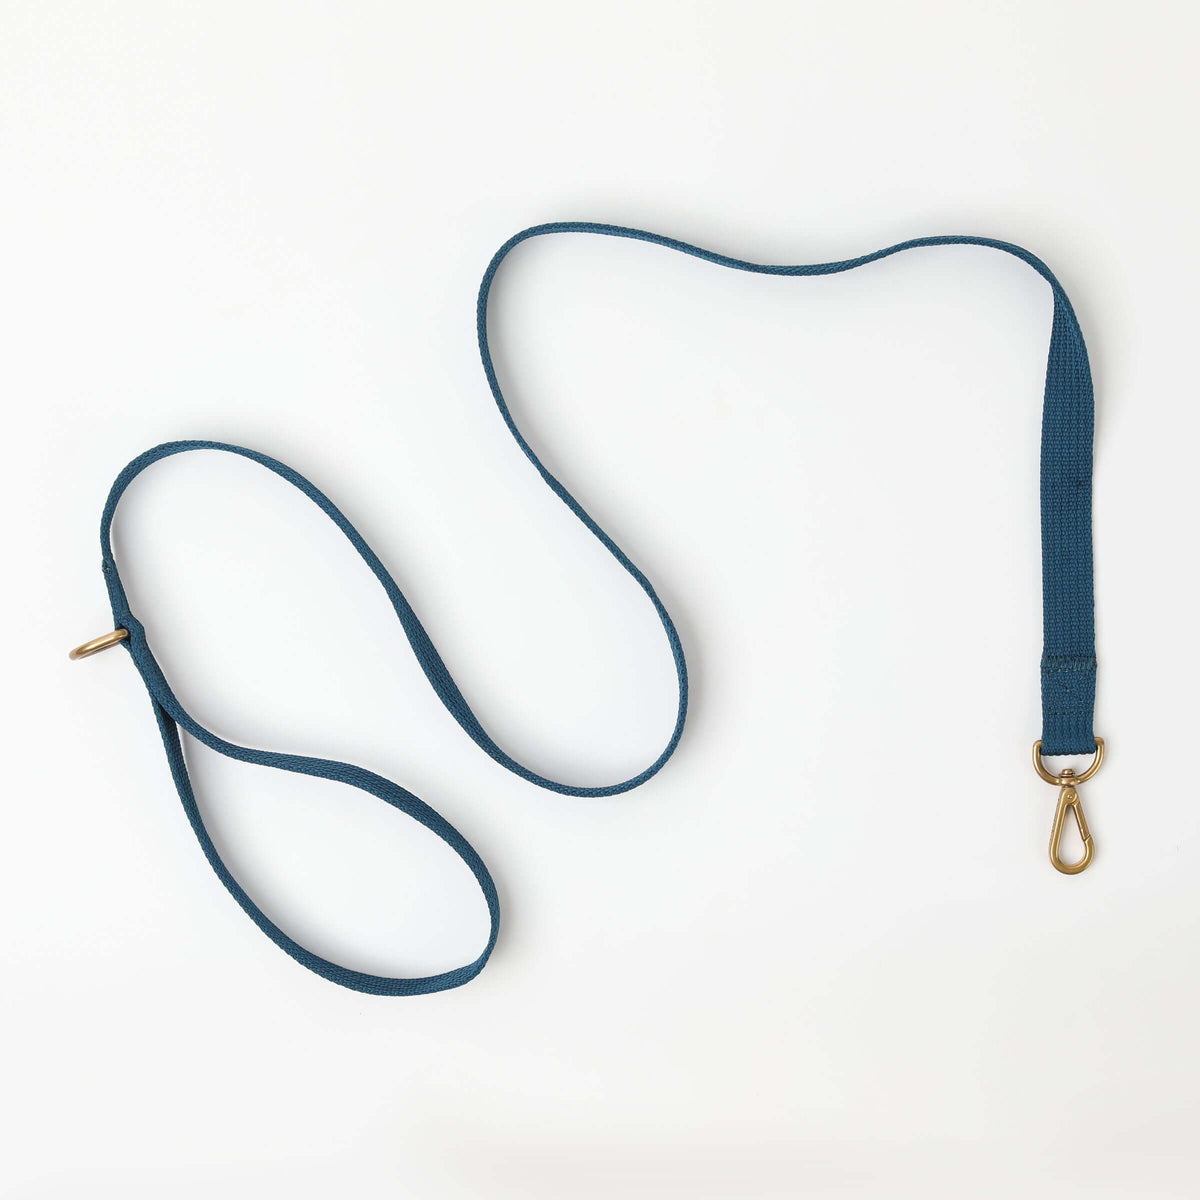 Blue  Waterproof dog leash made from 100% recycled ocean plastic